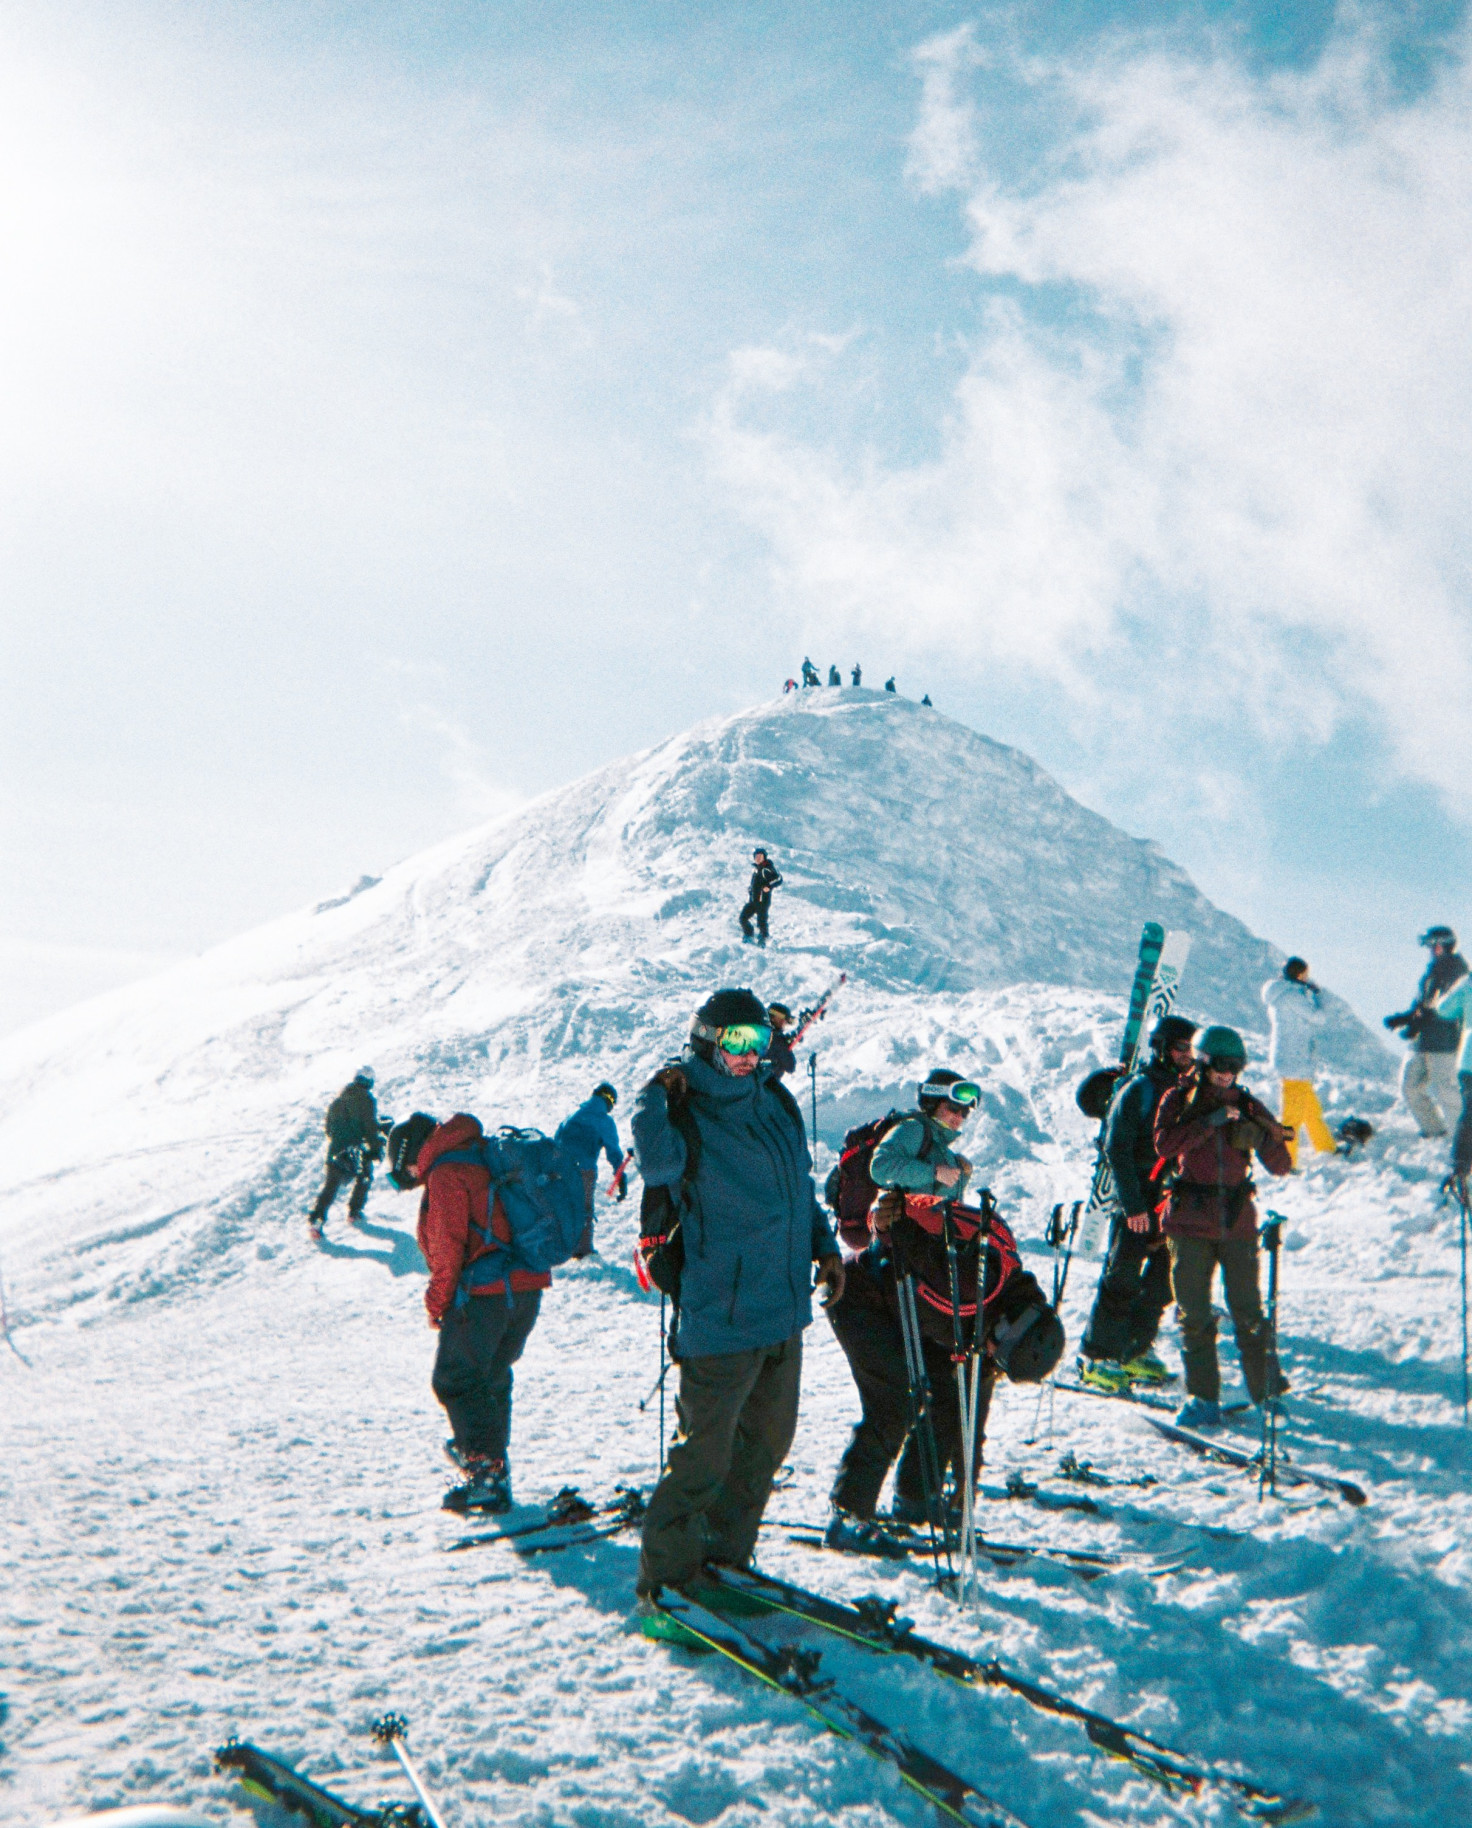 Skiers standing on top of mountain during daytime